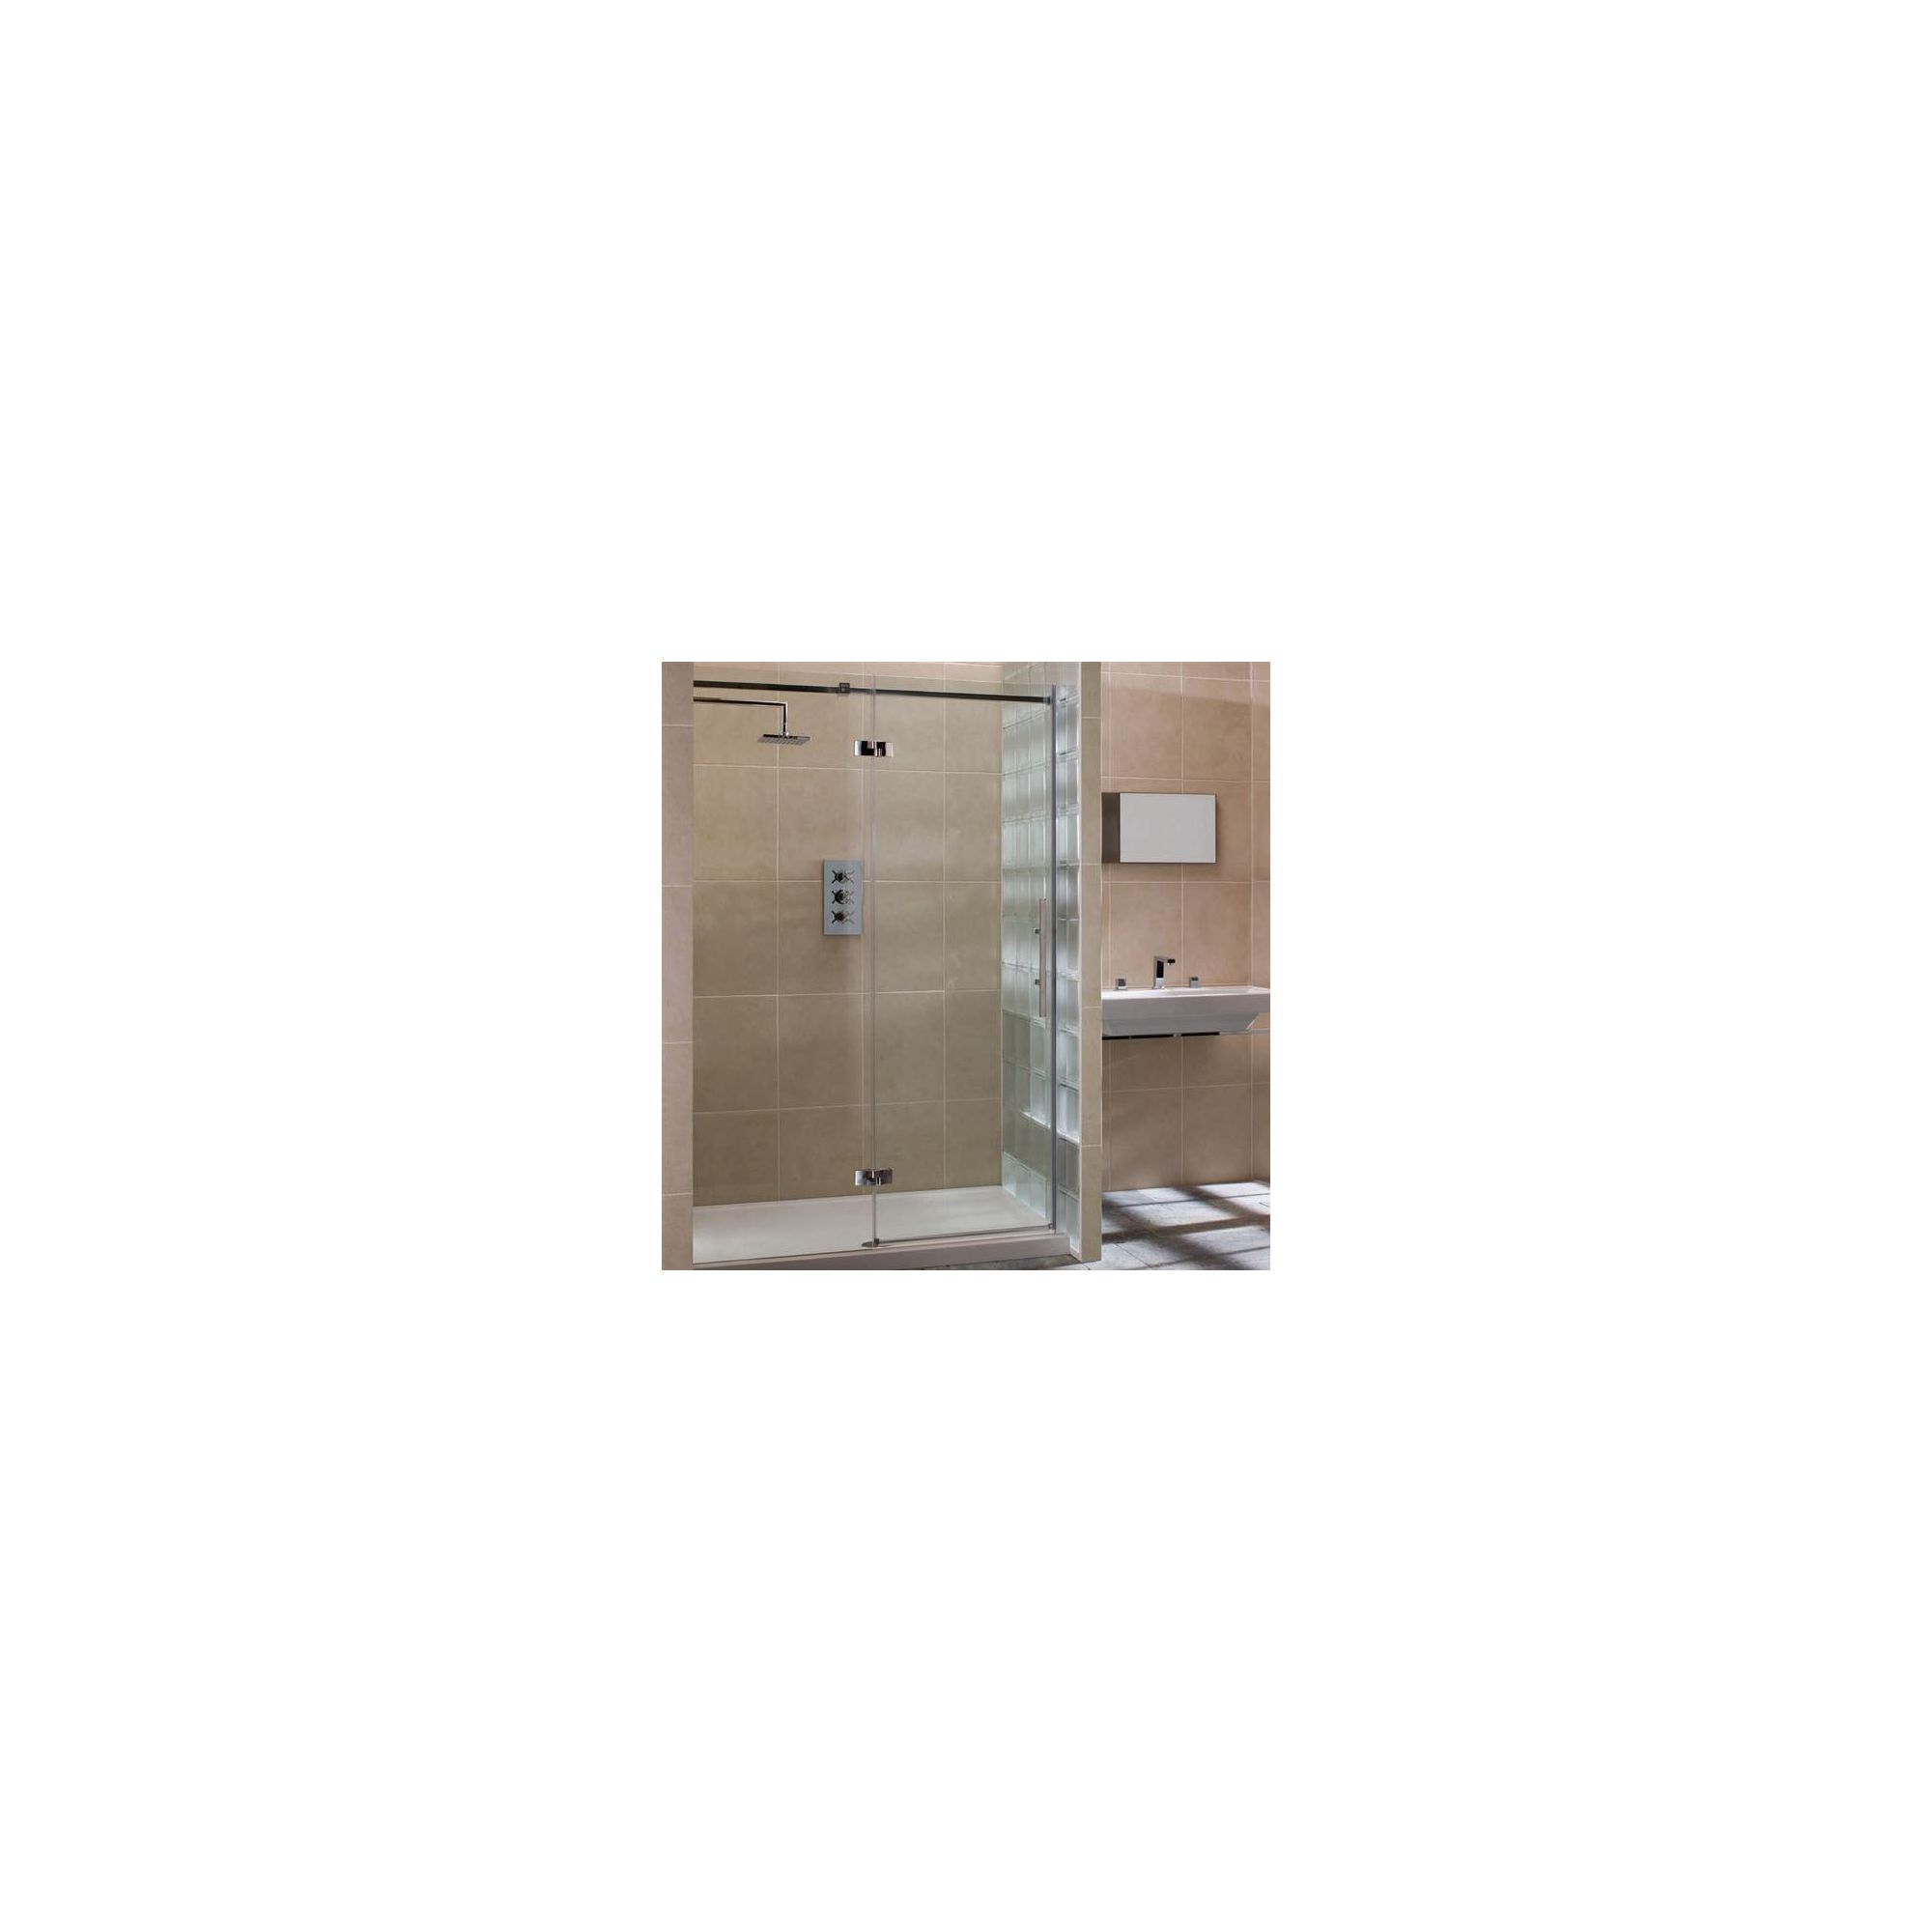 Merlyn Vivid Nine Hinged Door Alcove Shower Enclosure with Inline Panel, 1100mm x 800mm, Left Handed, Low Profile Tray, 8mm Glass at Tesco Direct